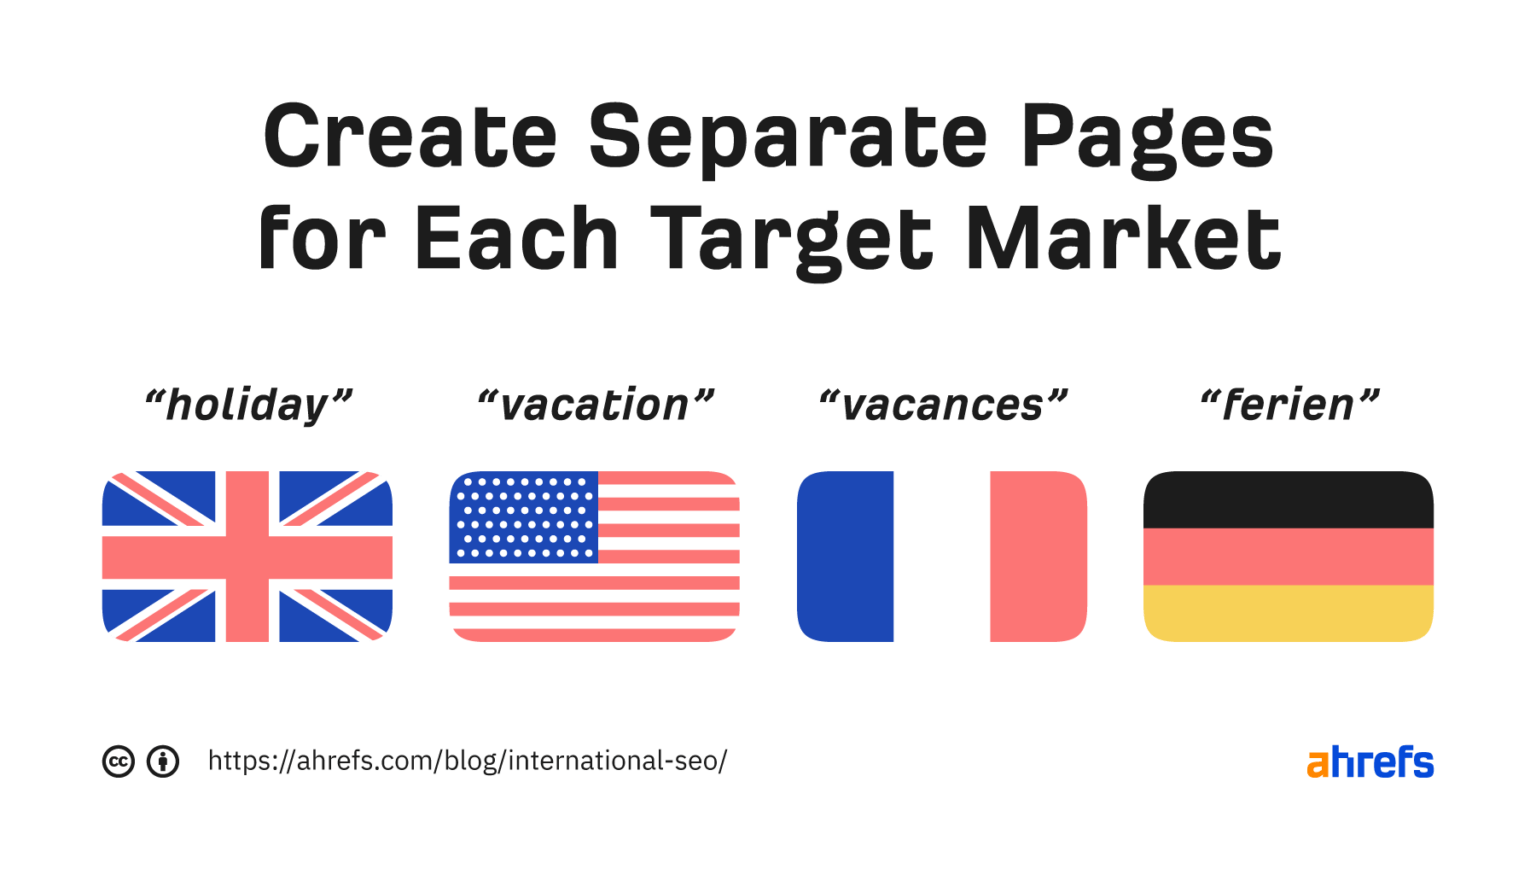 Create separate pages for each foreign SEO market and tailor the content to each country’s language and culture.